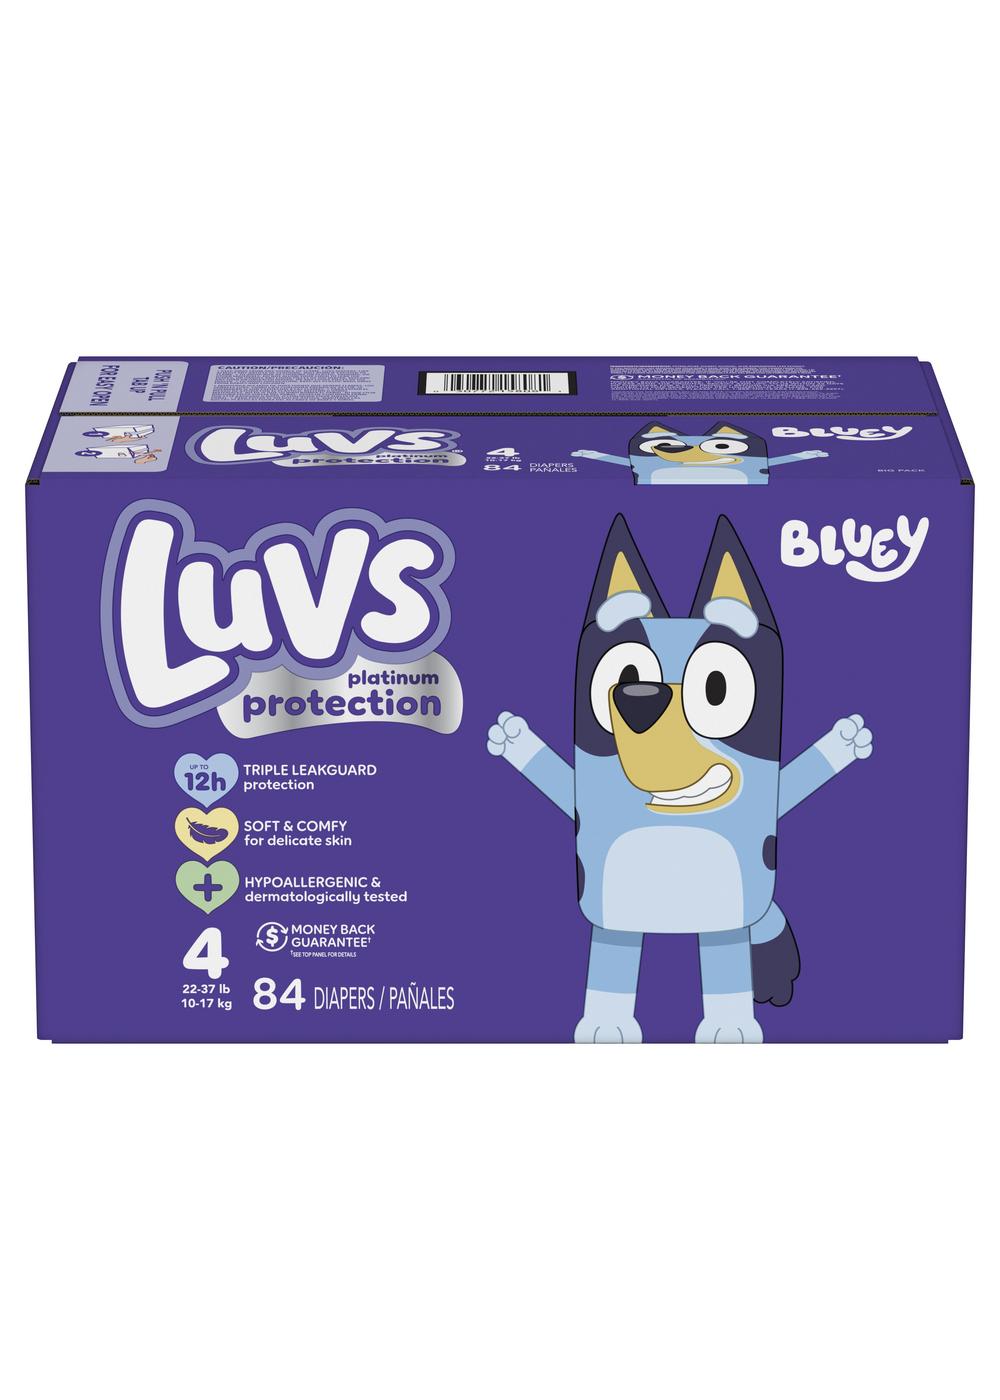 Luvs Platinum Protection Bluey Baby Diapers - Size 4; image 2 of 2